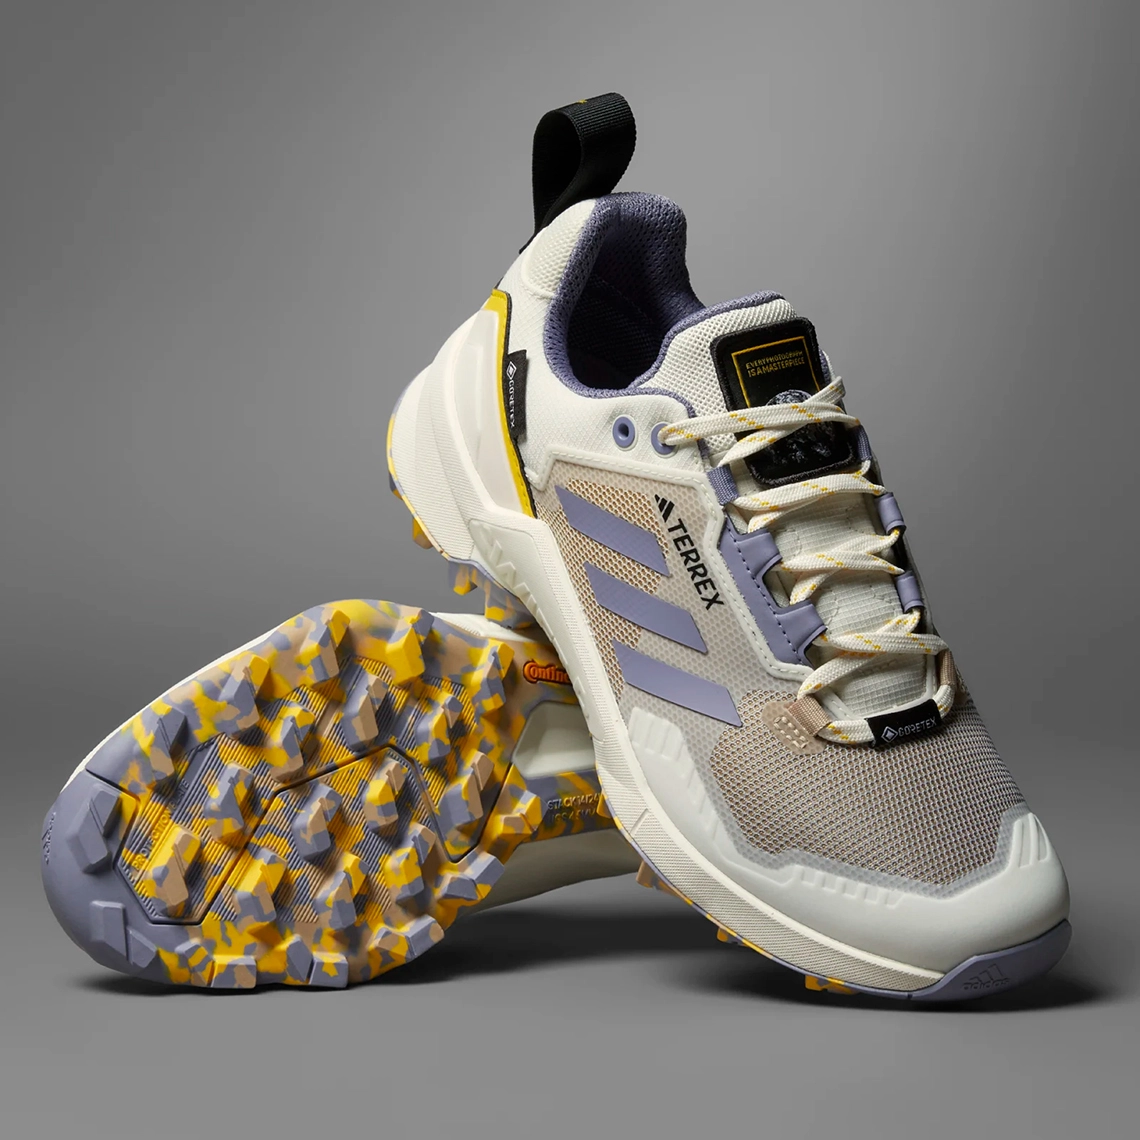 National Geographic Collaborates with adidas Terrex to Celebrate the Outdoors on April 28